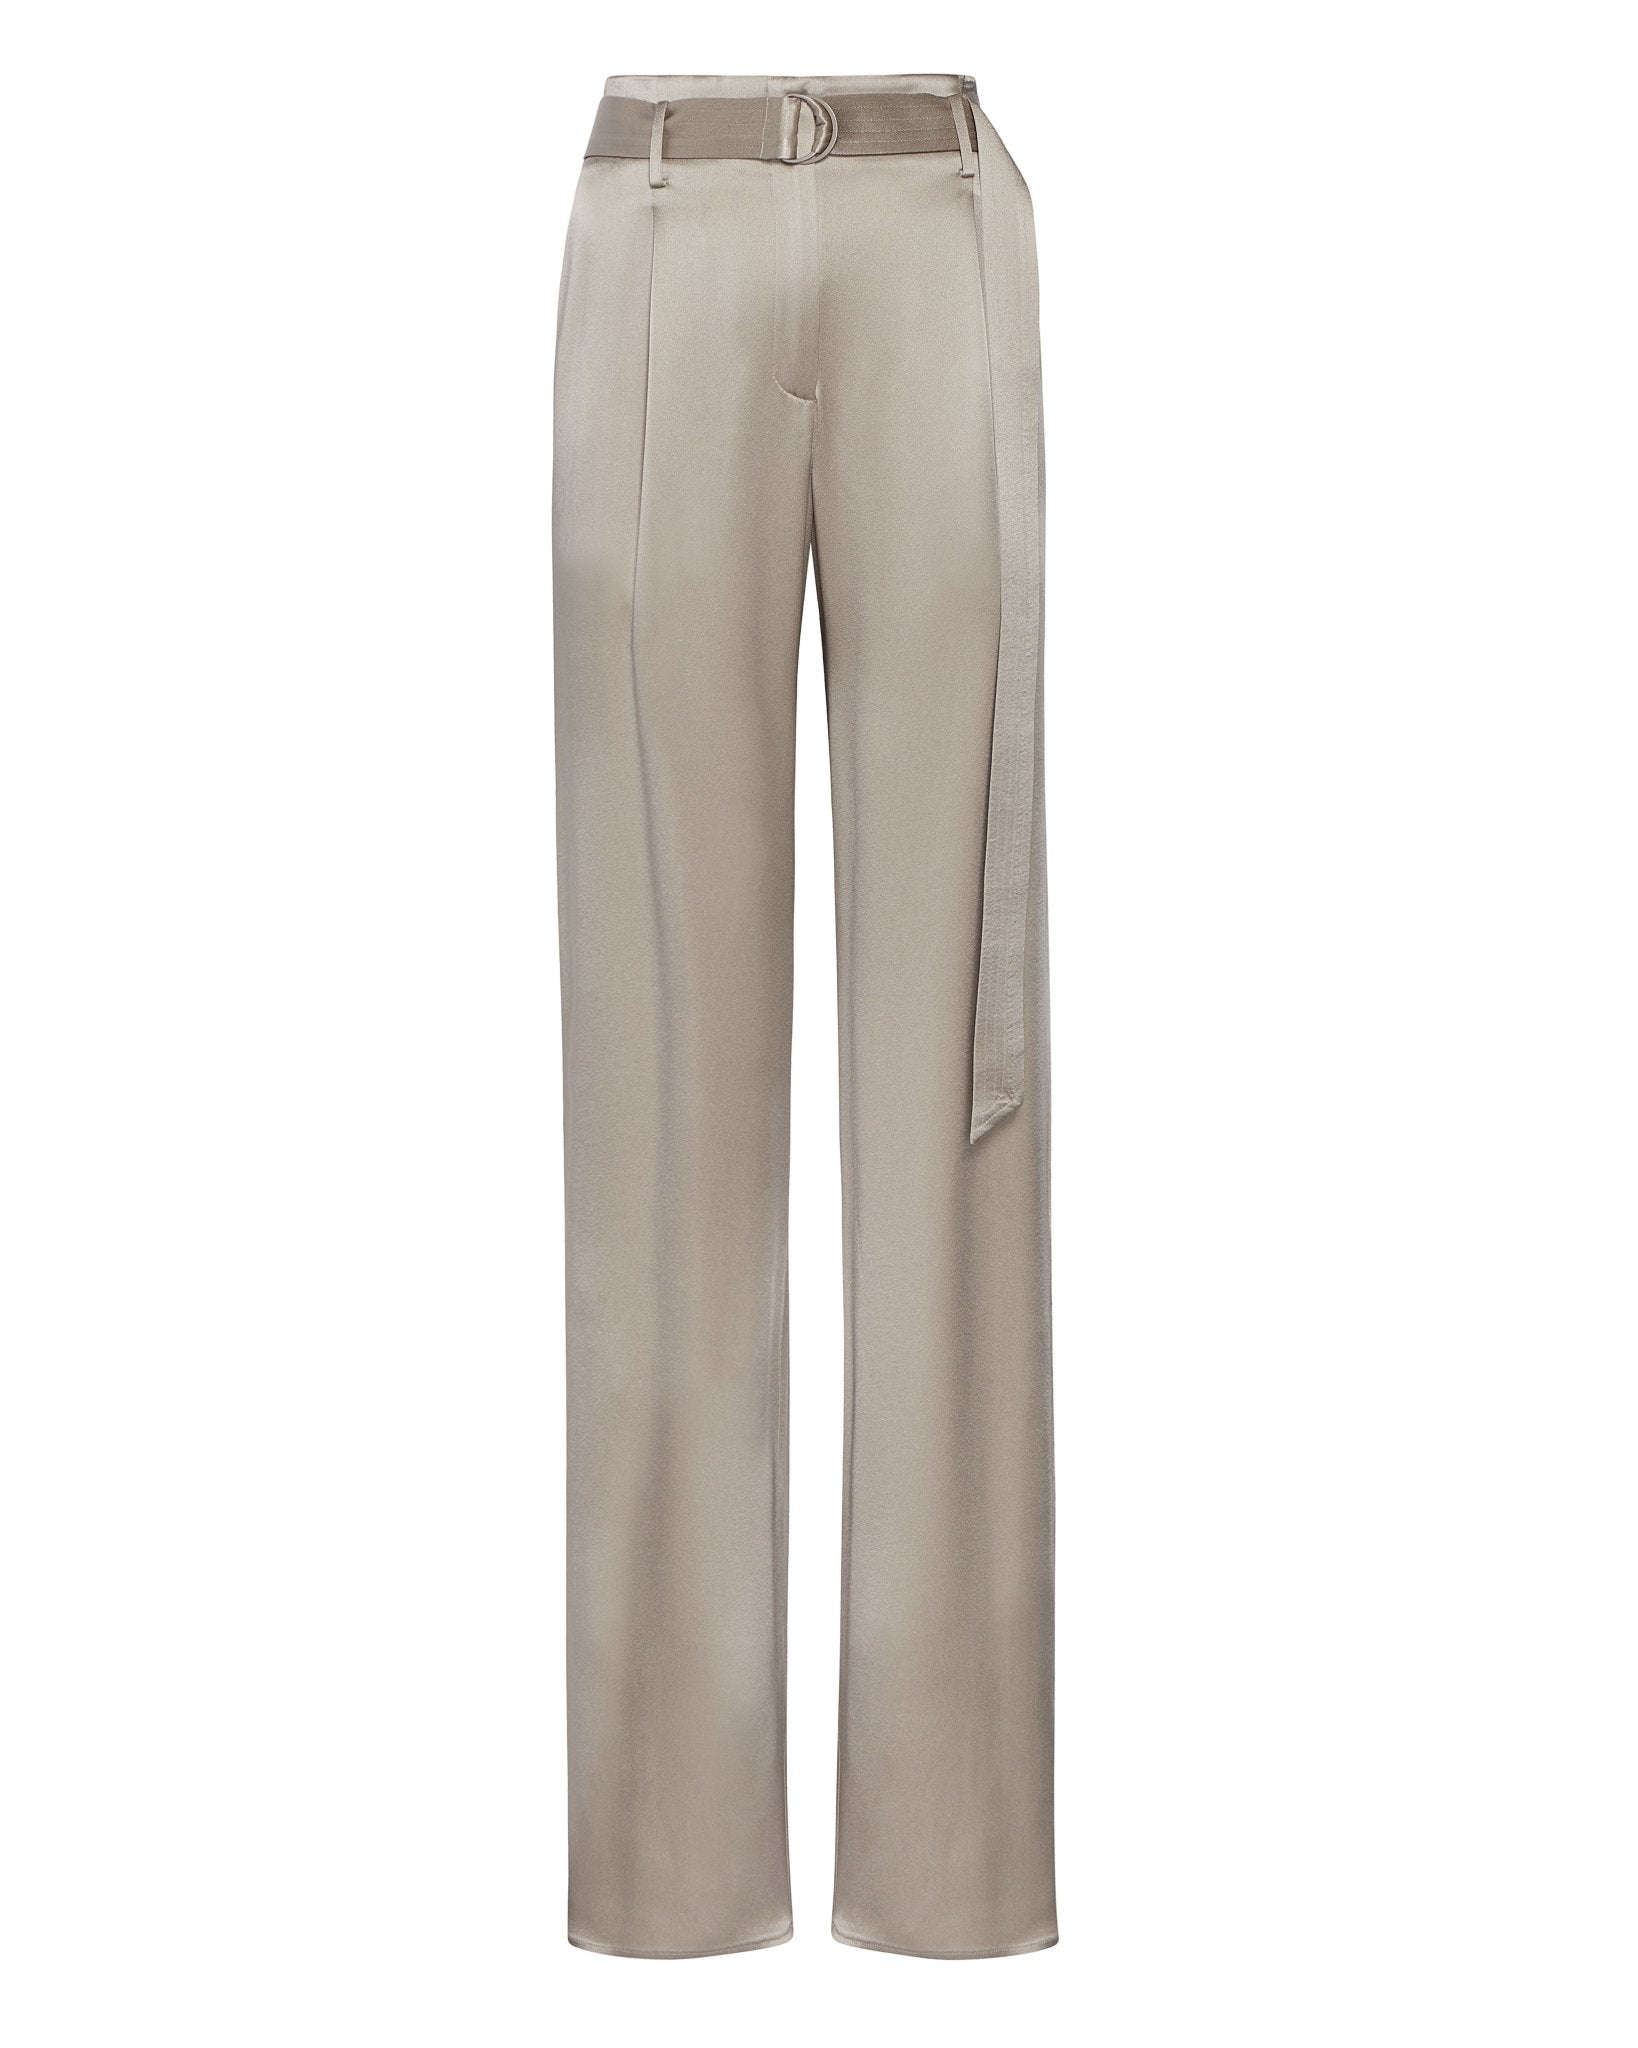 SATIN BELTED PANT - LAPOINTE